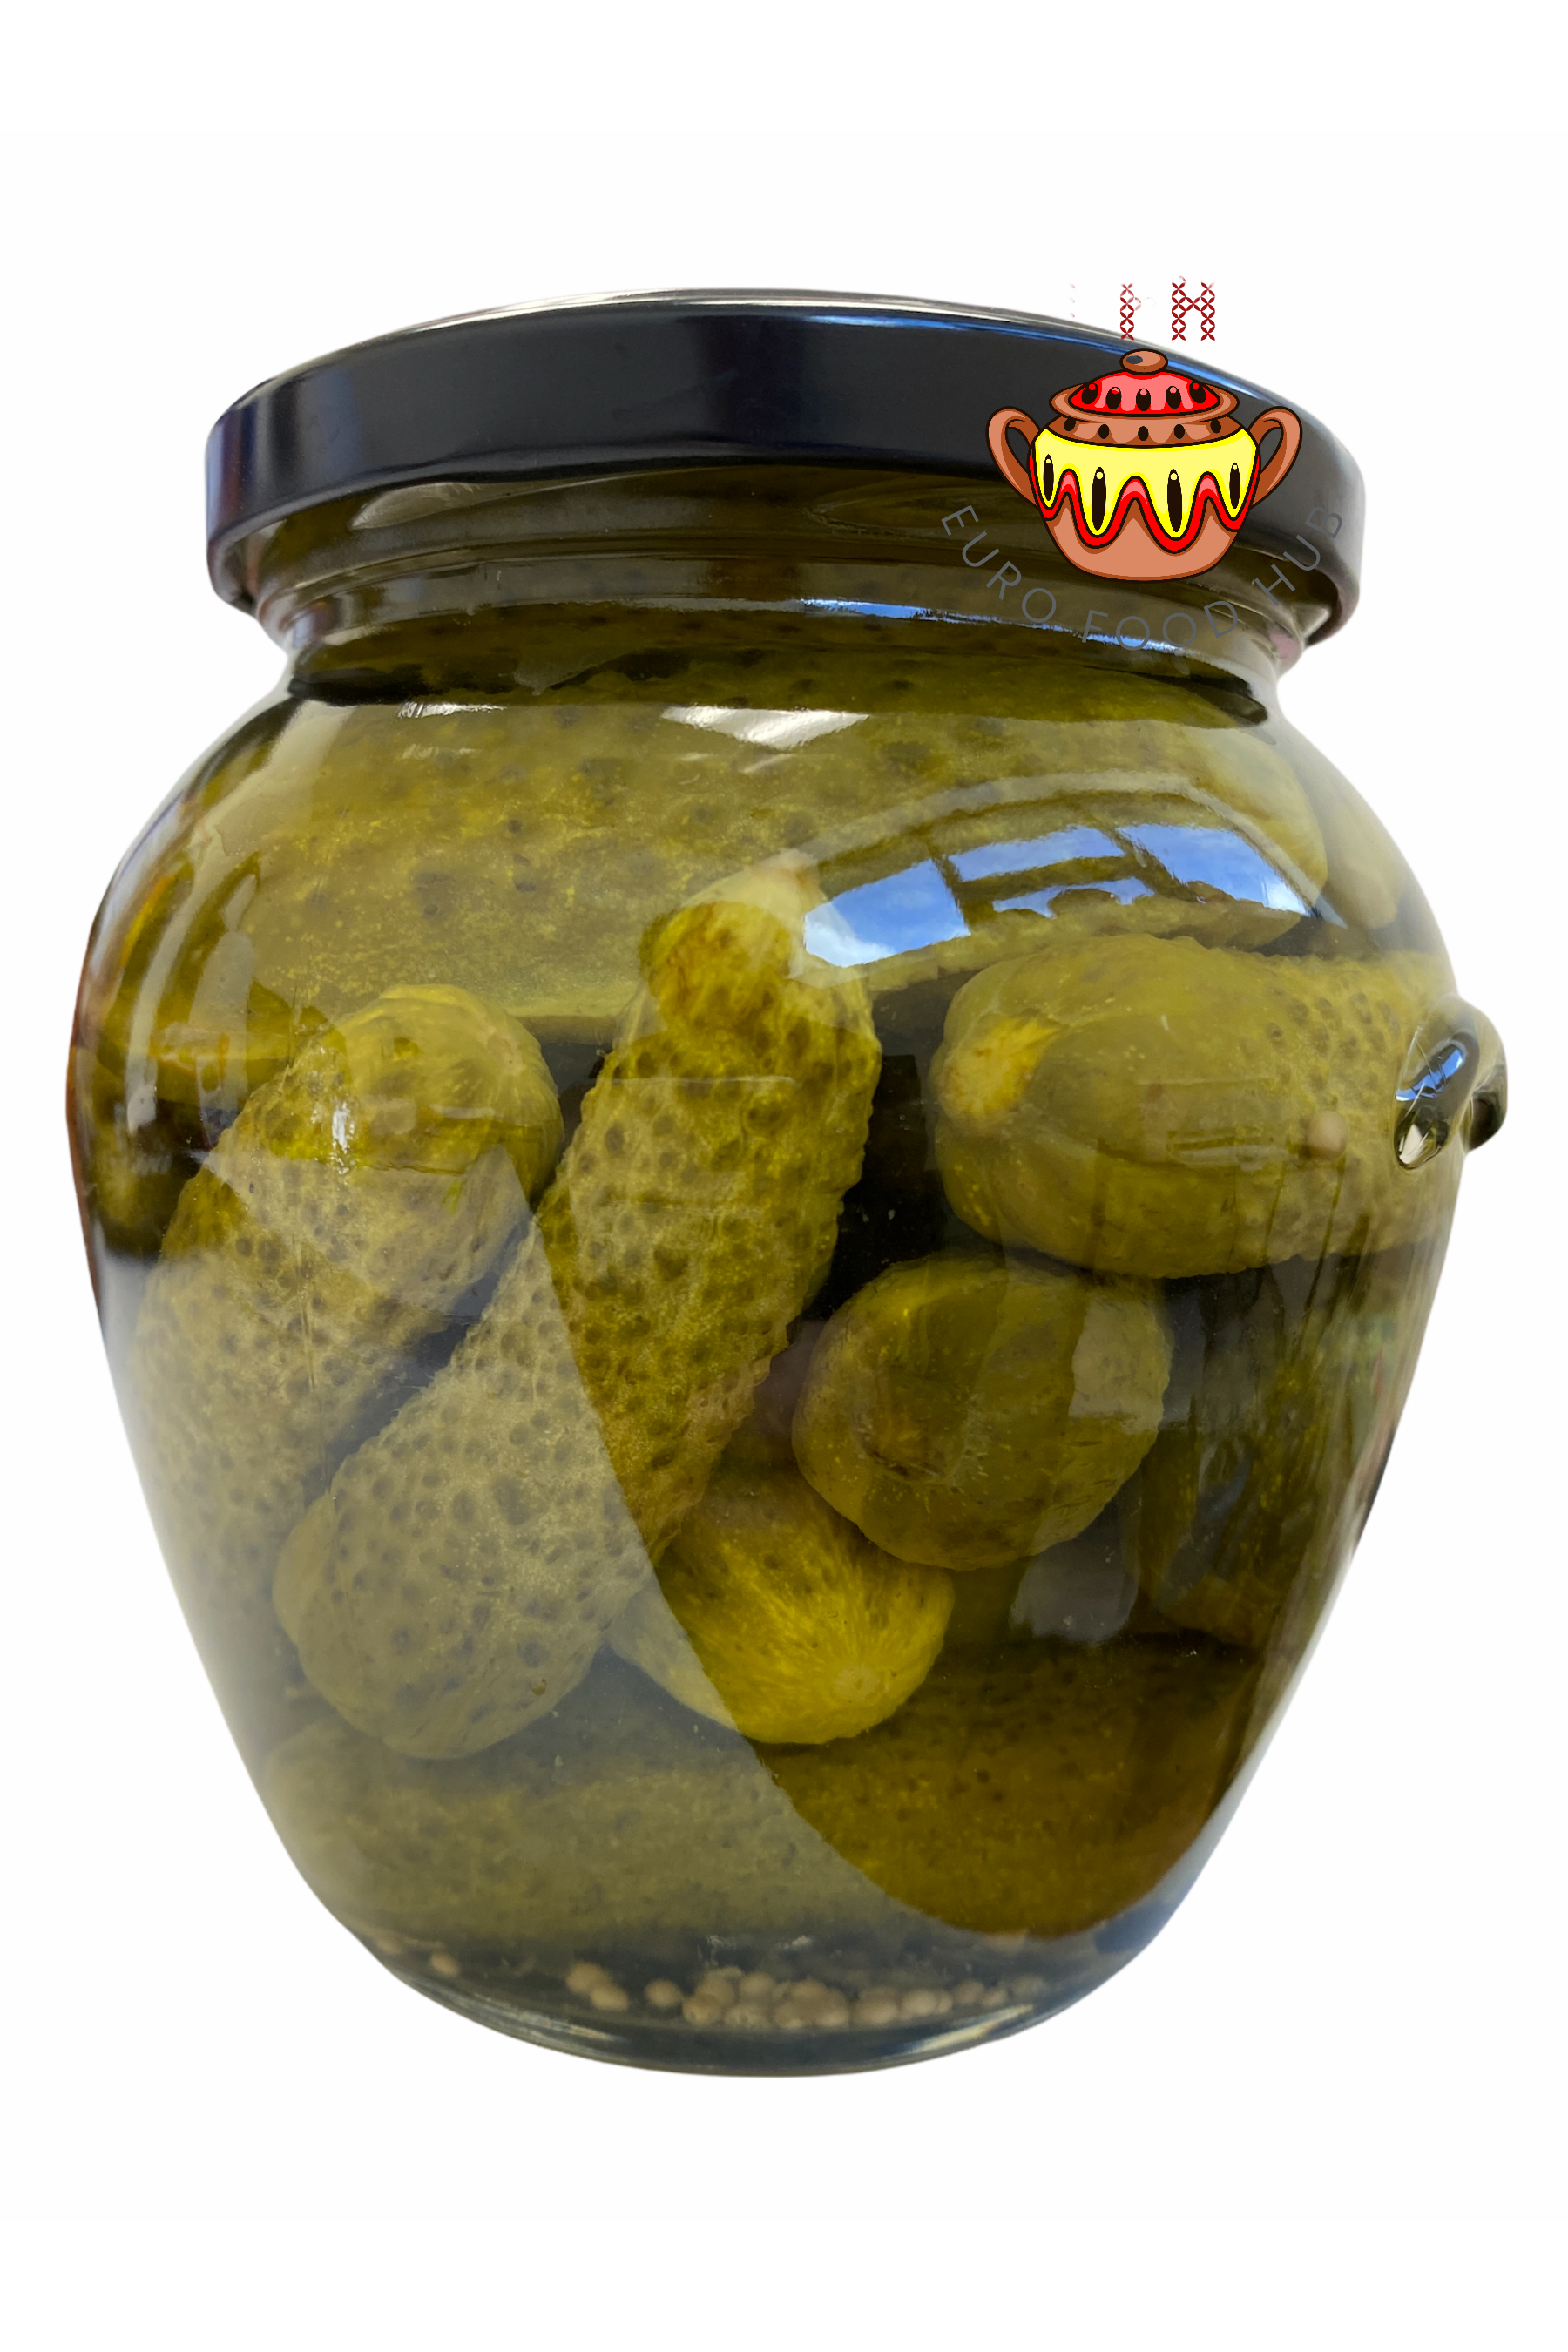 Brian's EXTRA GHERKINS - Pickles - 550g